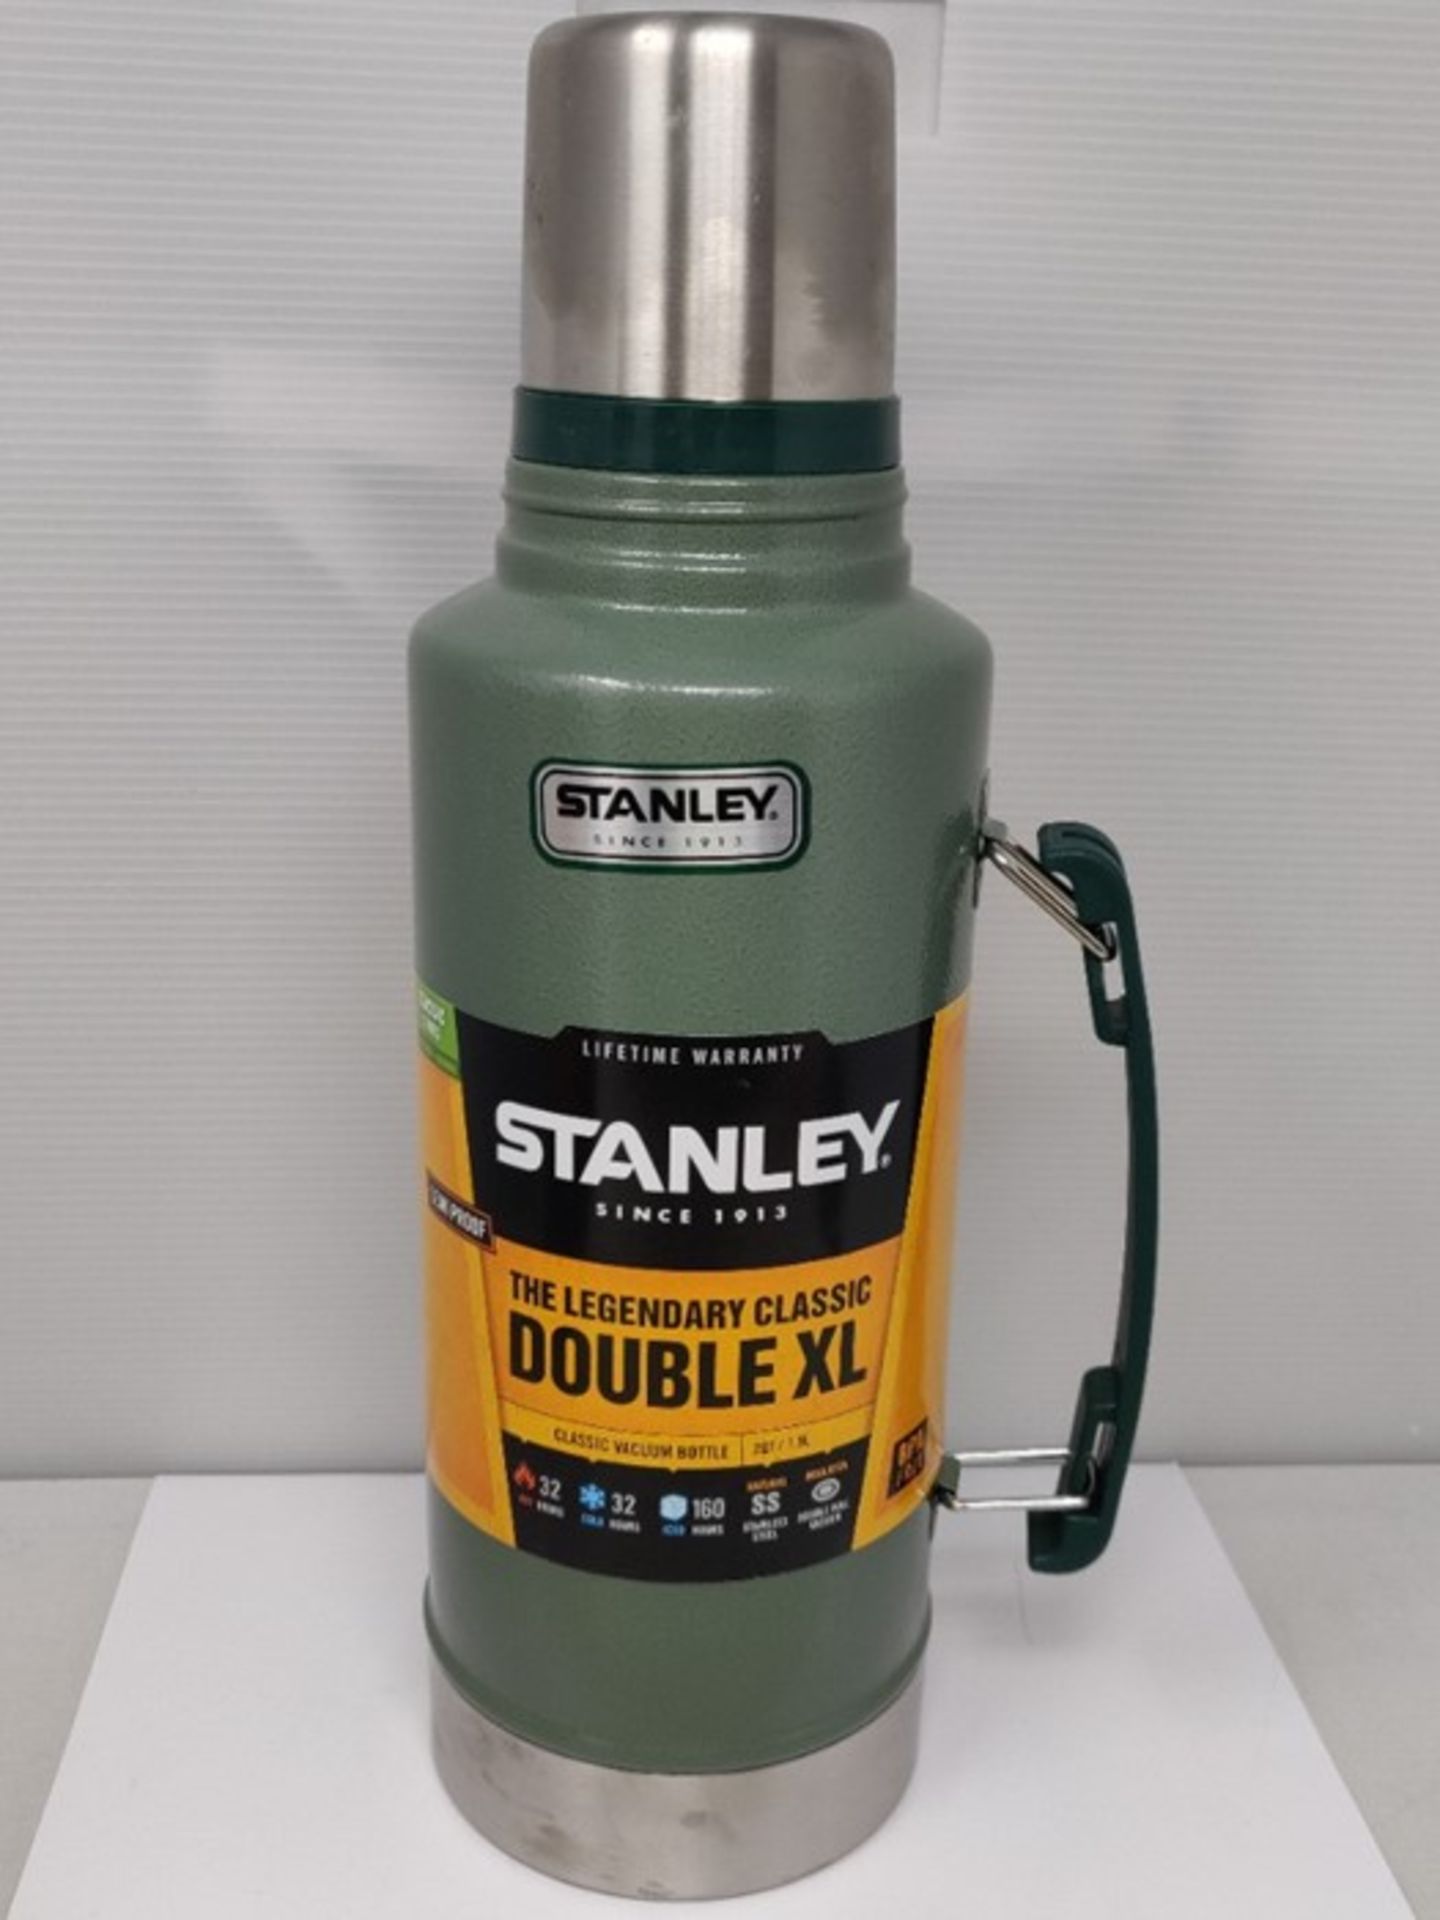 Stanley 18-8 Stainless Steel-Double-Wall Vacuum Insulation Water Bottle, Hammertone Gr - Image 2 of 2